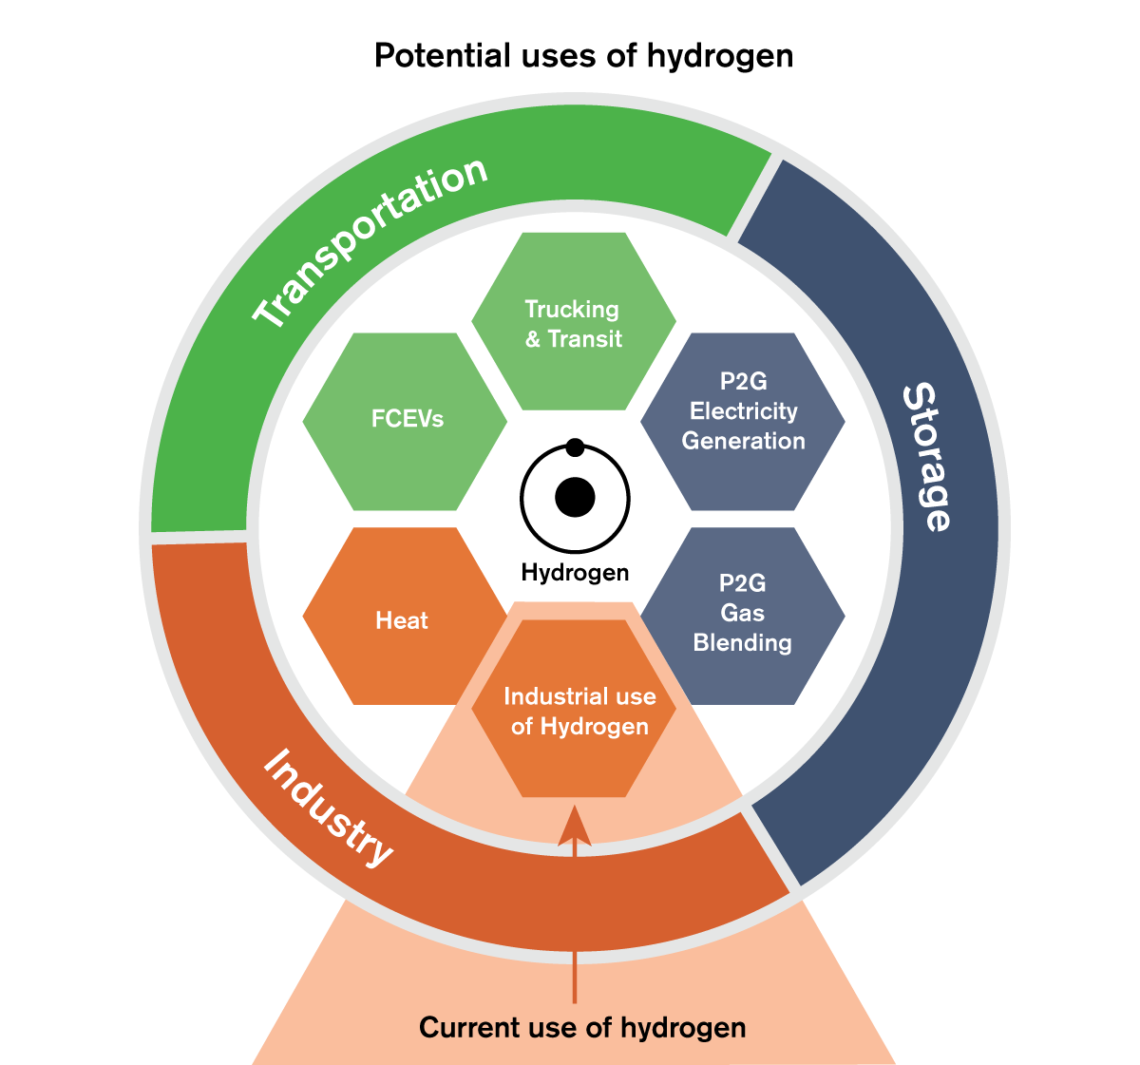 illustration showing possible uses for hydrogen beyond current use